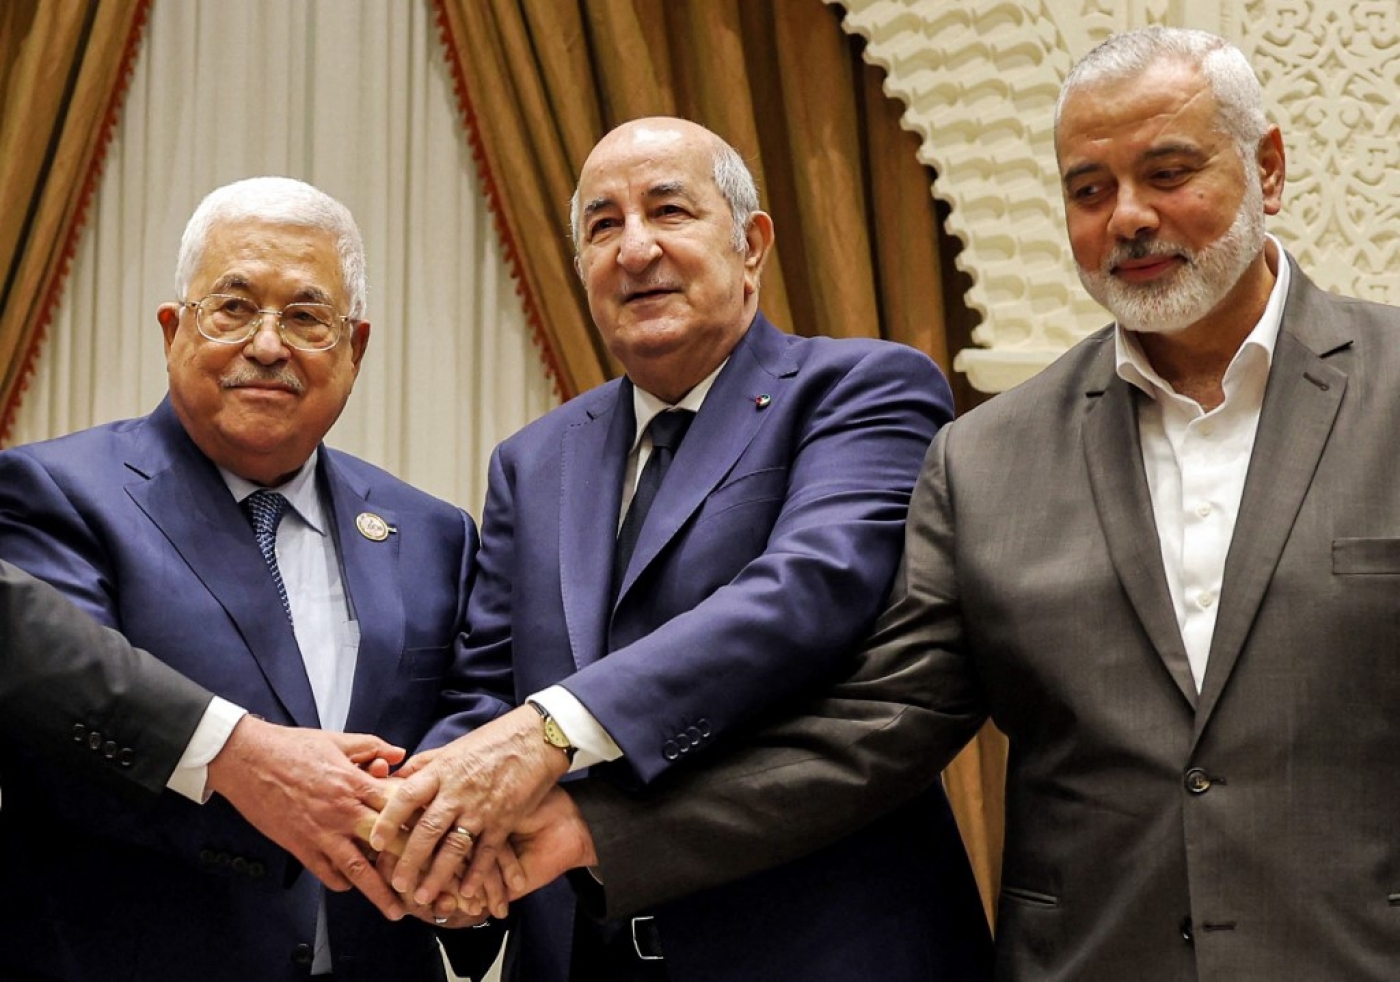 A handout picture provided by the Palestinian Authority's press office (PPO) on 5 July 2022 shows (L to R) Palestinian president Mahmud Abbas shaking hands with Algerian President Abdelmajid Tebboune and with Palestinian Hamas movement's leader Ismail Haniyeh. (AFP) 